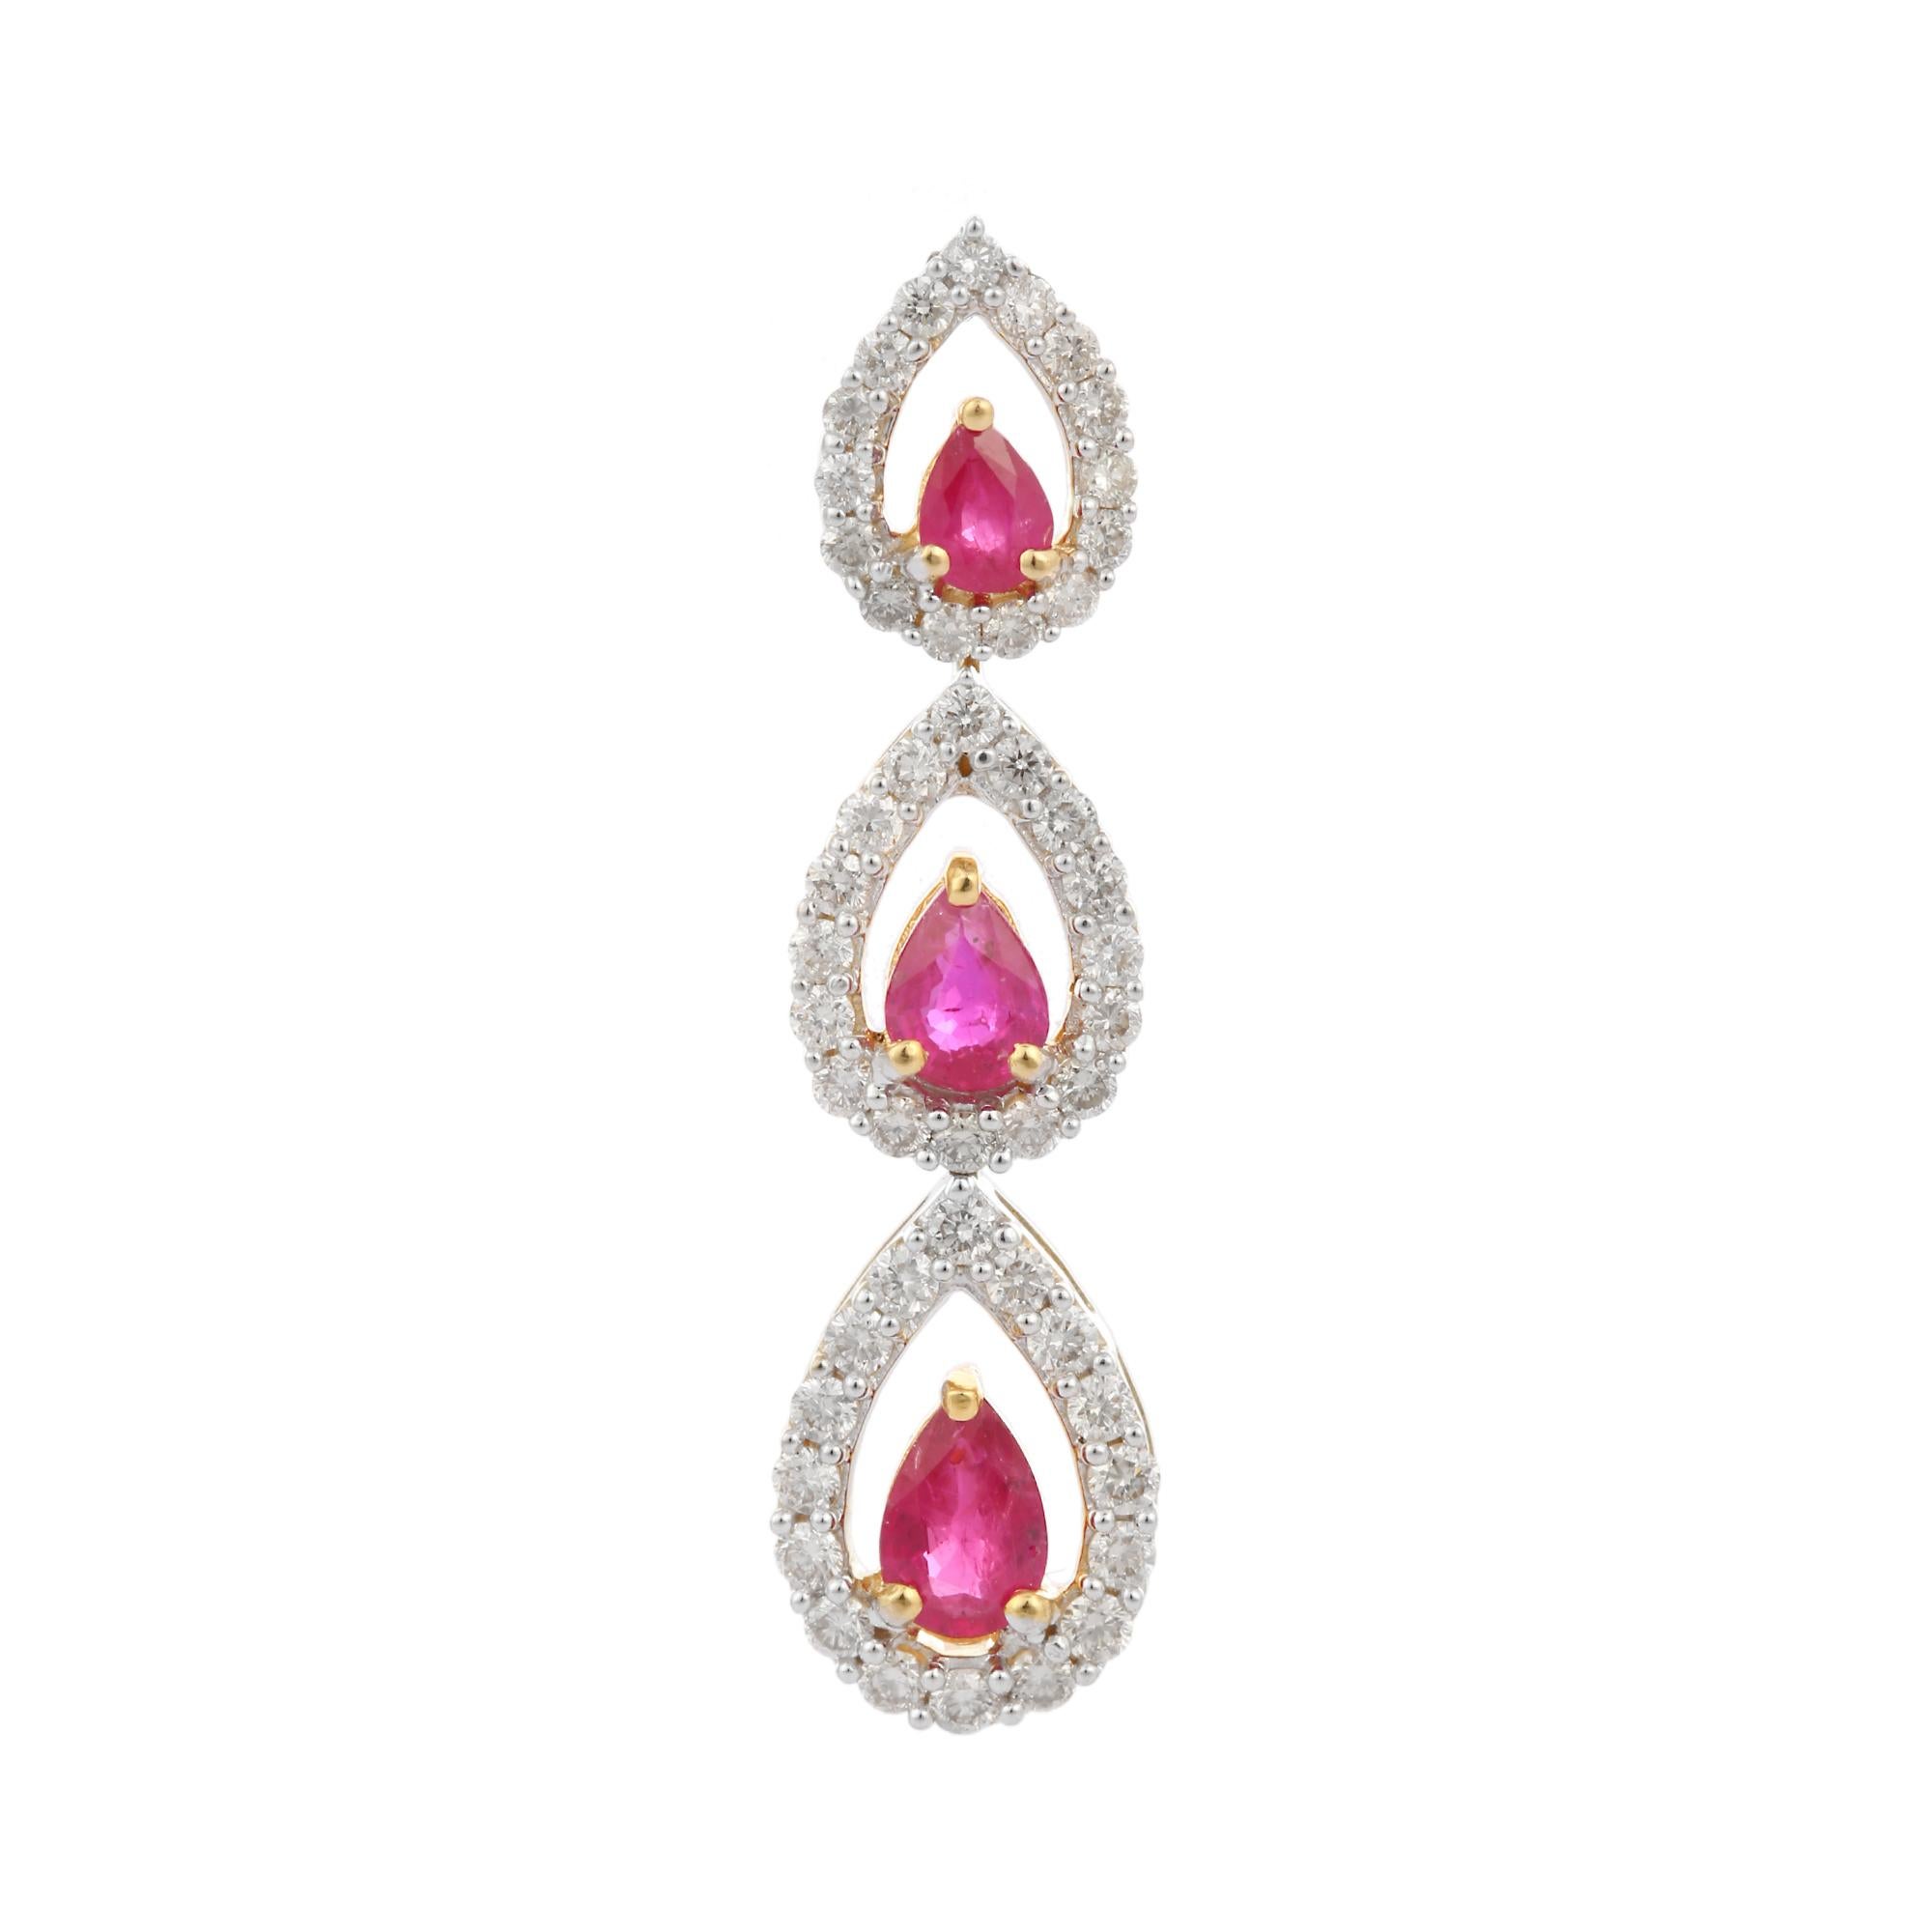 Pear cut three stone ruby diamond pendant in 18K Gold. It has a pear cut ruby with halo diamonds that completes your look with a decent touch. Pendants are used to wear or gifted to represent love and promises. It's an attractive jewelry piece that